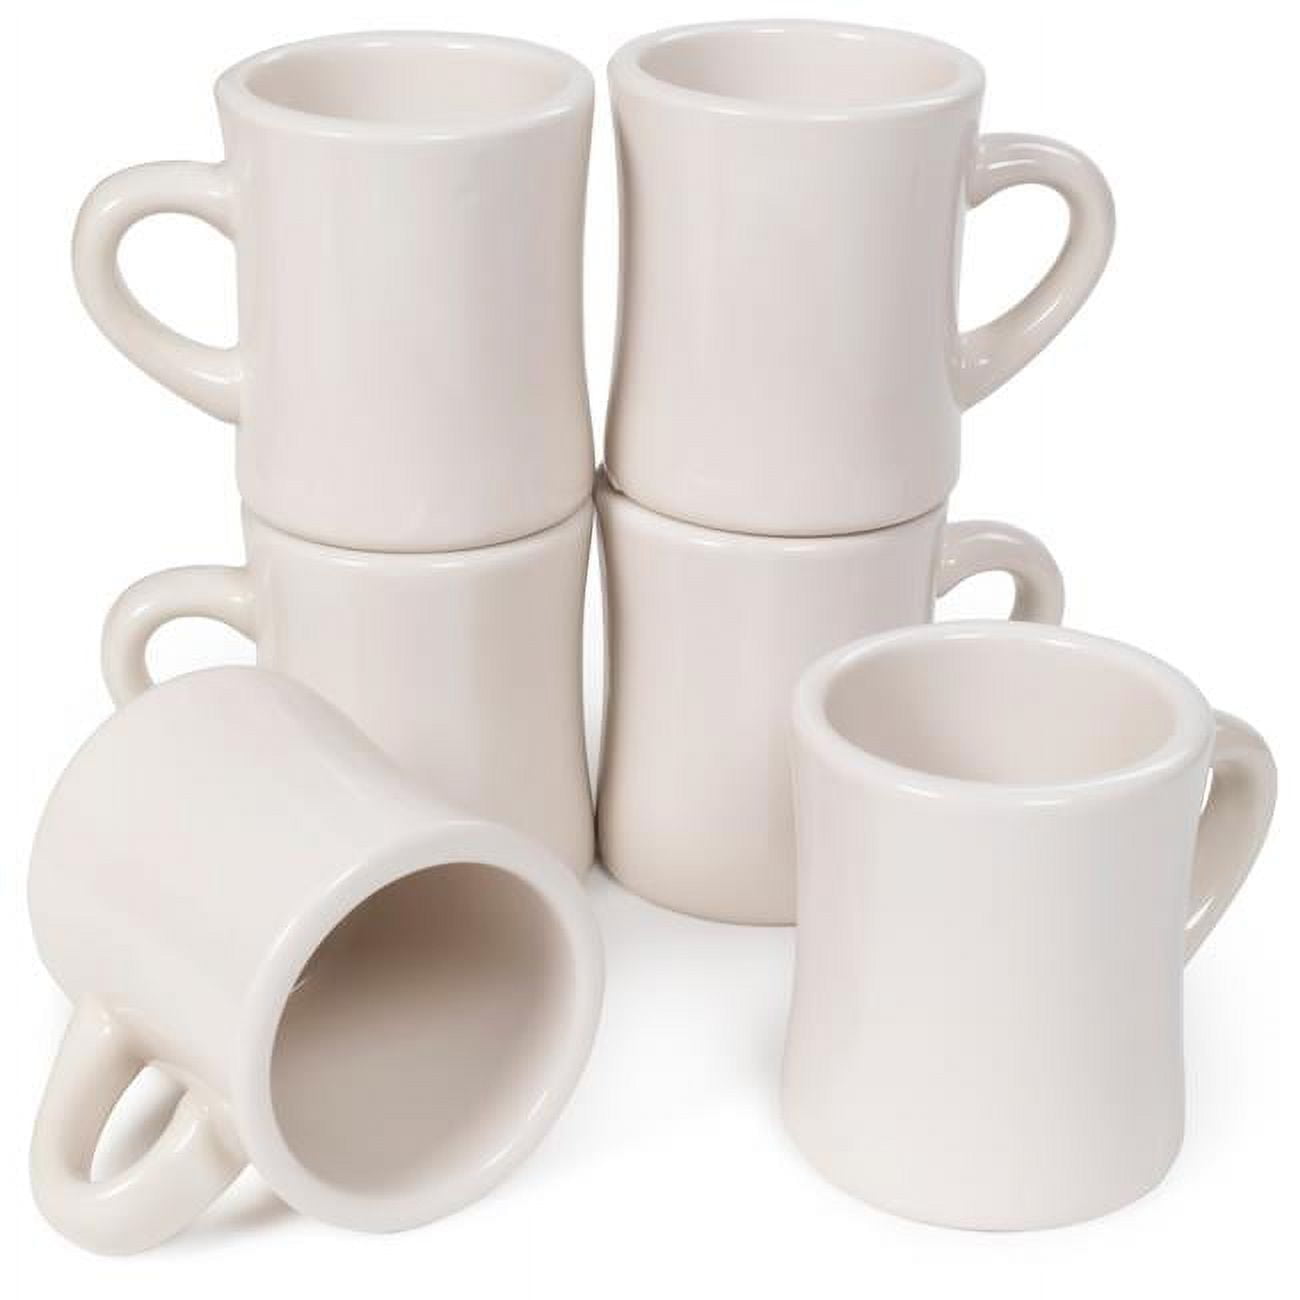 Picture of Brybelly KCFC-001 10 oz Coffee Mugs - Pack of 6